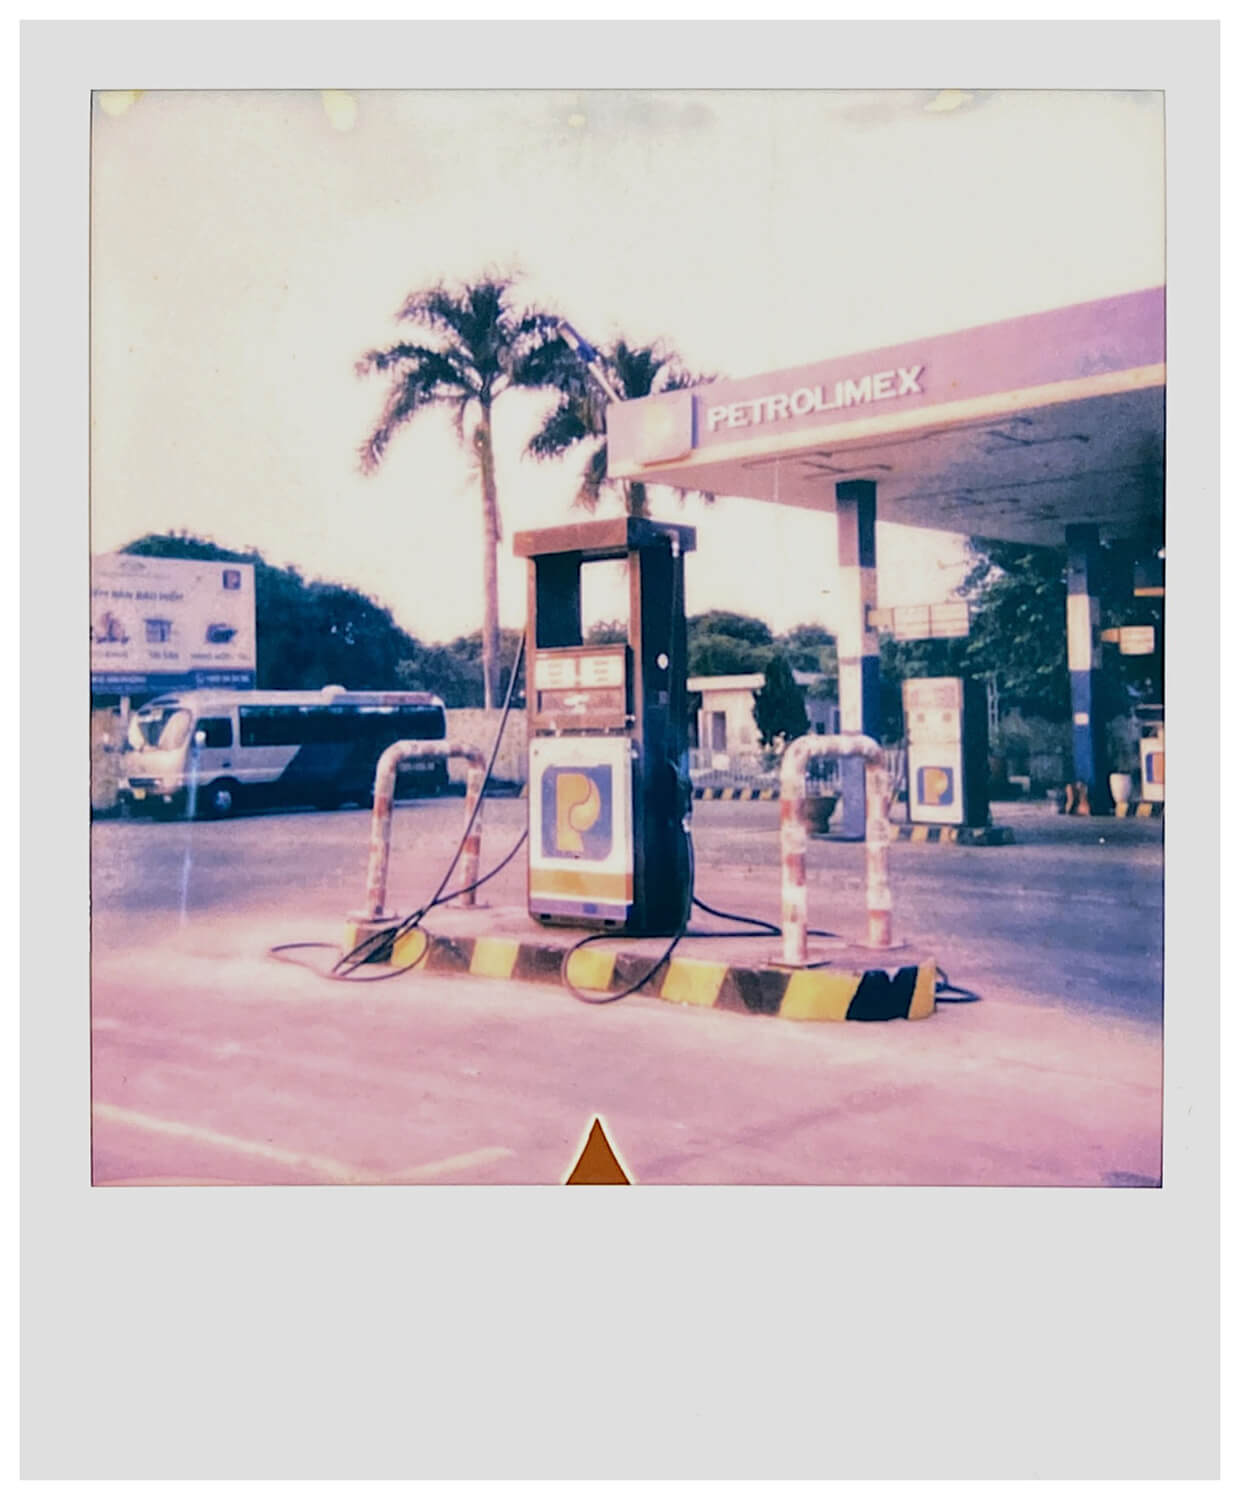 A Polaroid photo of a gas station during a sunny day, a bit overexposed and it was shot using a Polaroid 636 Talking camera.